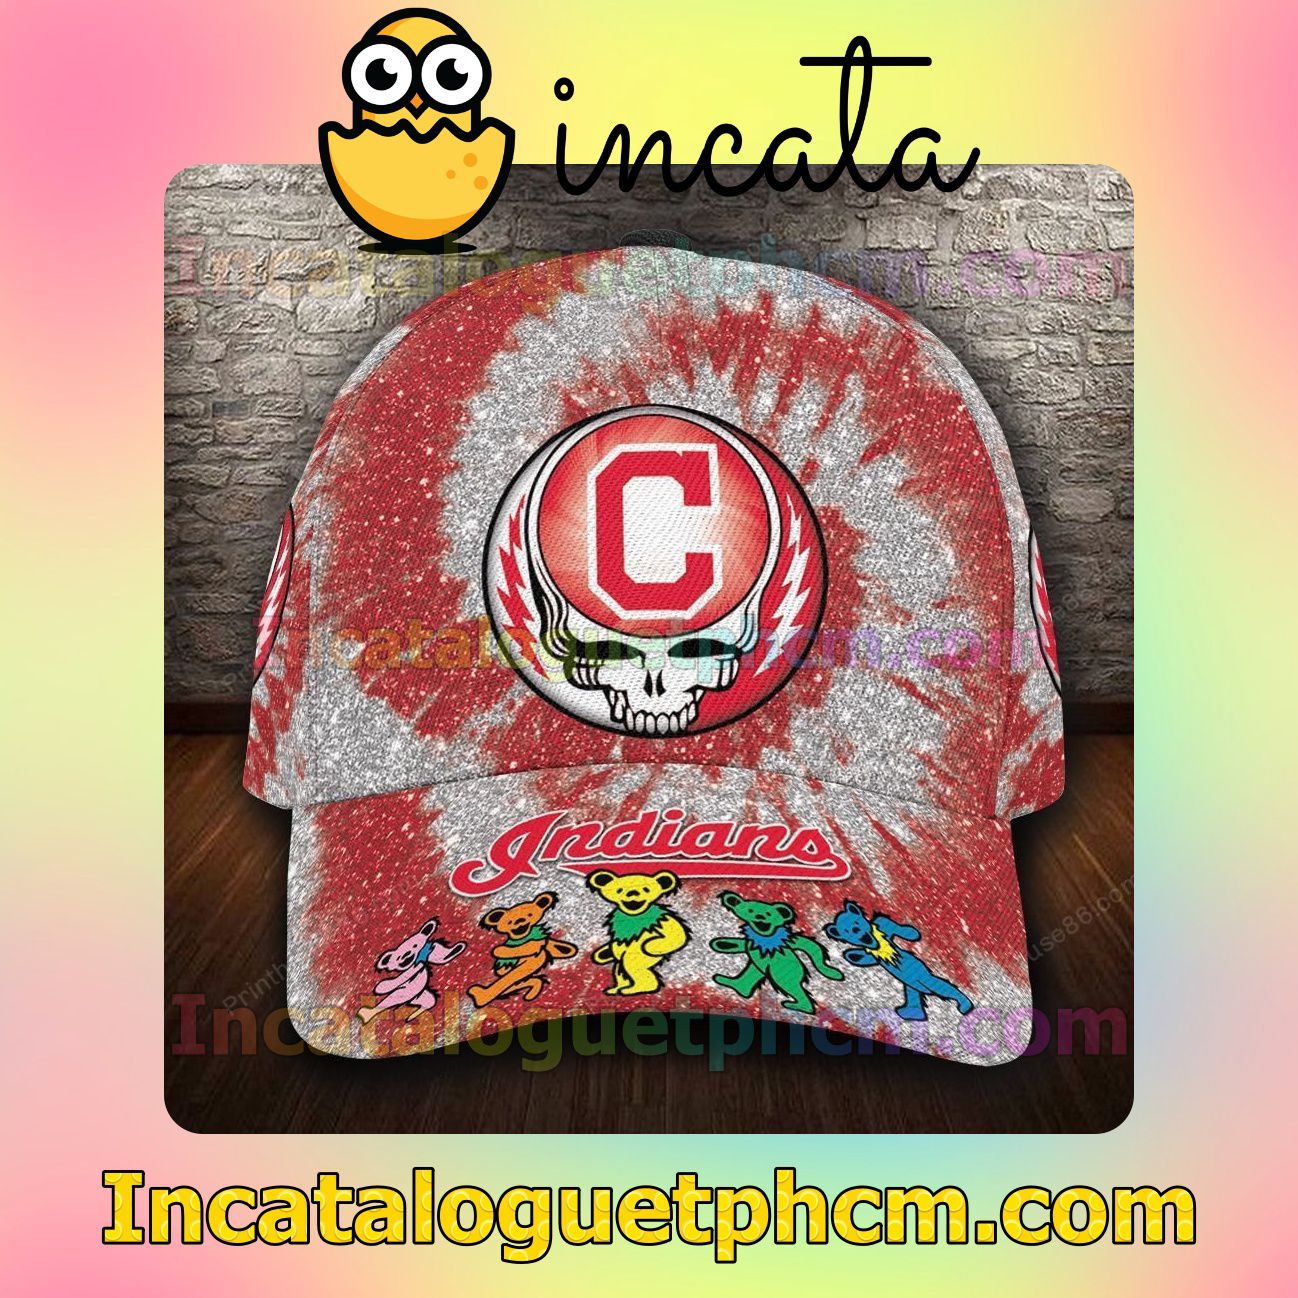 Check out Cleveland Indians & Grateful Dead Band MLB Customized Hat Caps